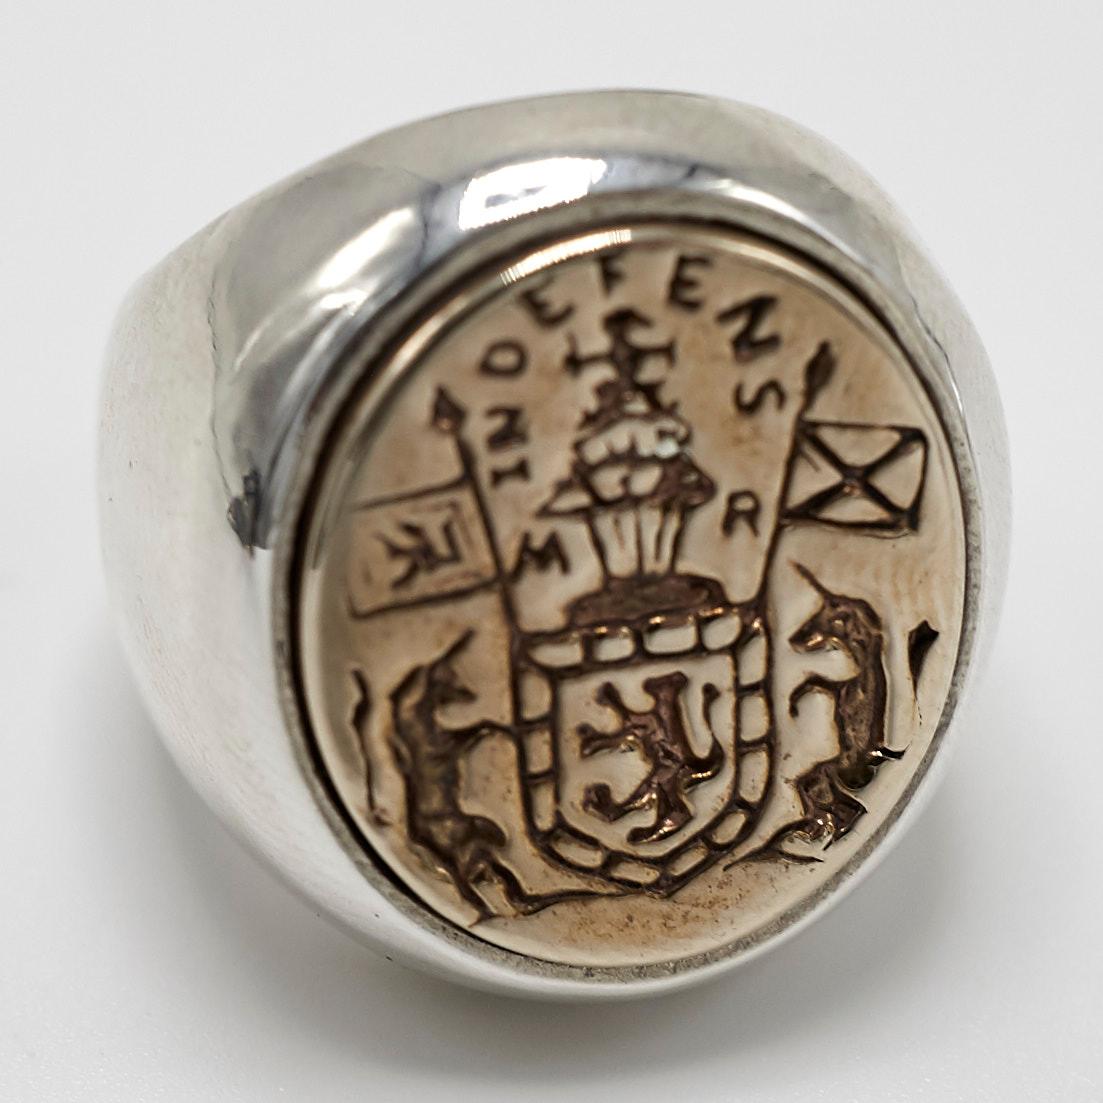 Crest Signet Ring Sterling Silver Bronze Queen Mary Family Crest Lion Unicorn J Dauphin
Unisex

Inspired by Queen Mary of Scots ring. Gold signet-ring; engraved; shoulders ornamented with flowers and leaves. Oval bezel set with silver intaglio